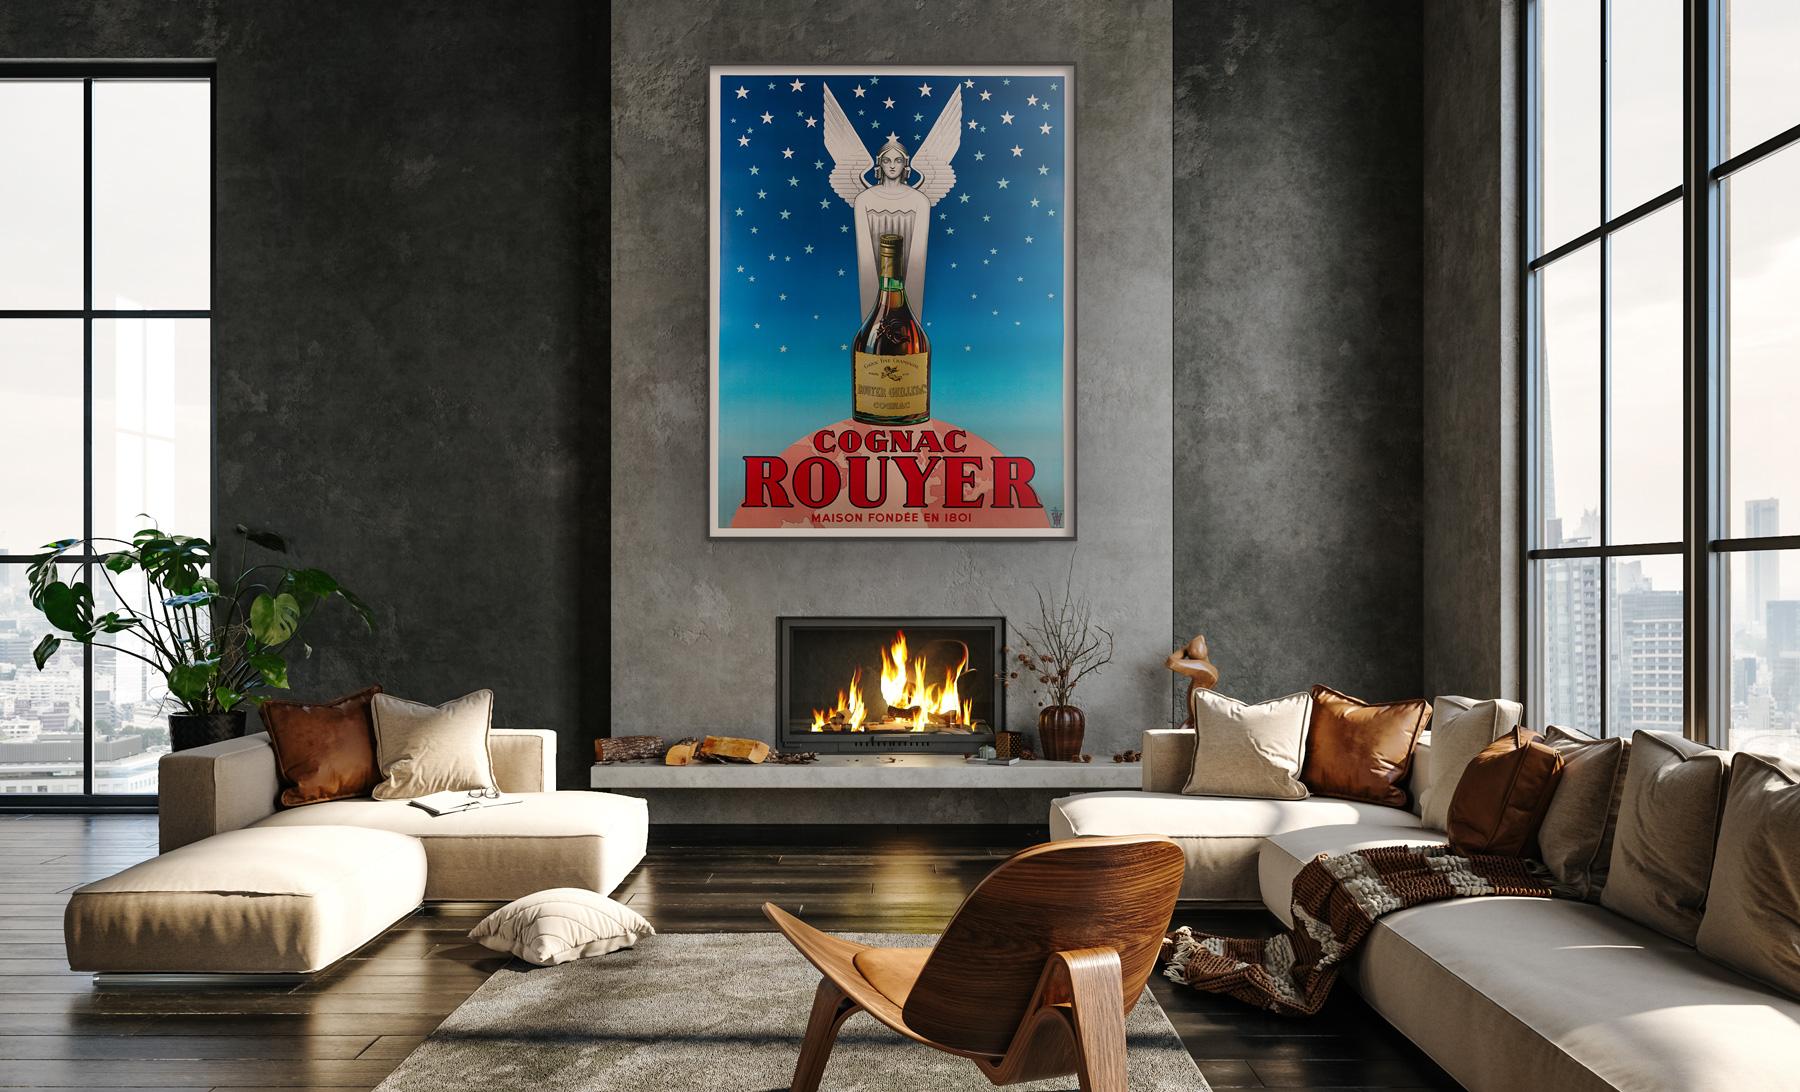 Wonderful original French vintage Cognac Rouyer alcohol poster from 1945. Superb colours and stunning imagery.

Rouyer Guillet was founded in 1701 by Philippe Guilletand, known as one of the most prestigious congnac producers and distiller for